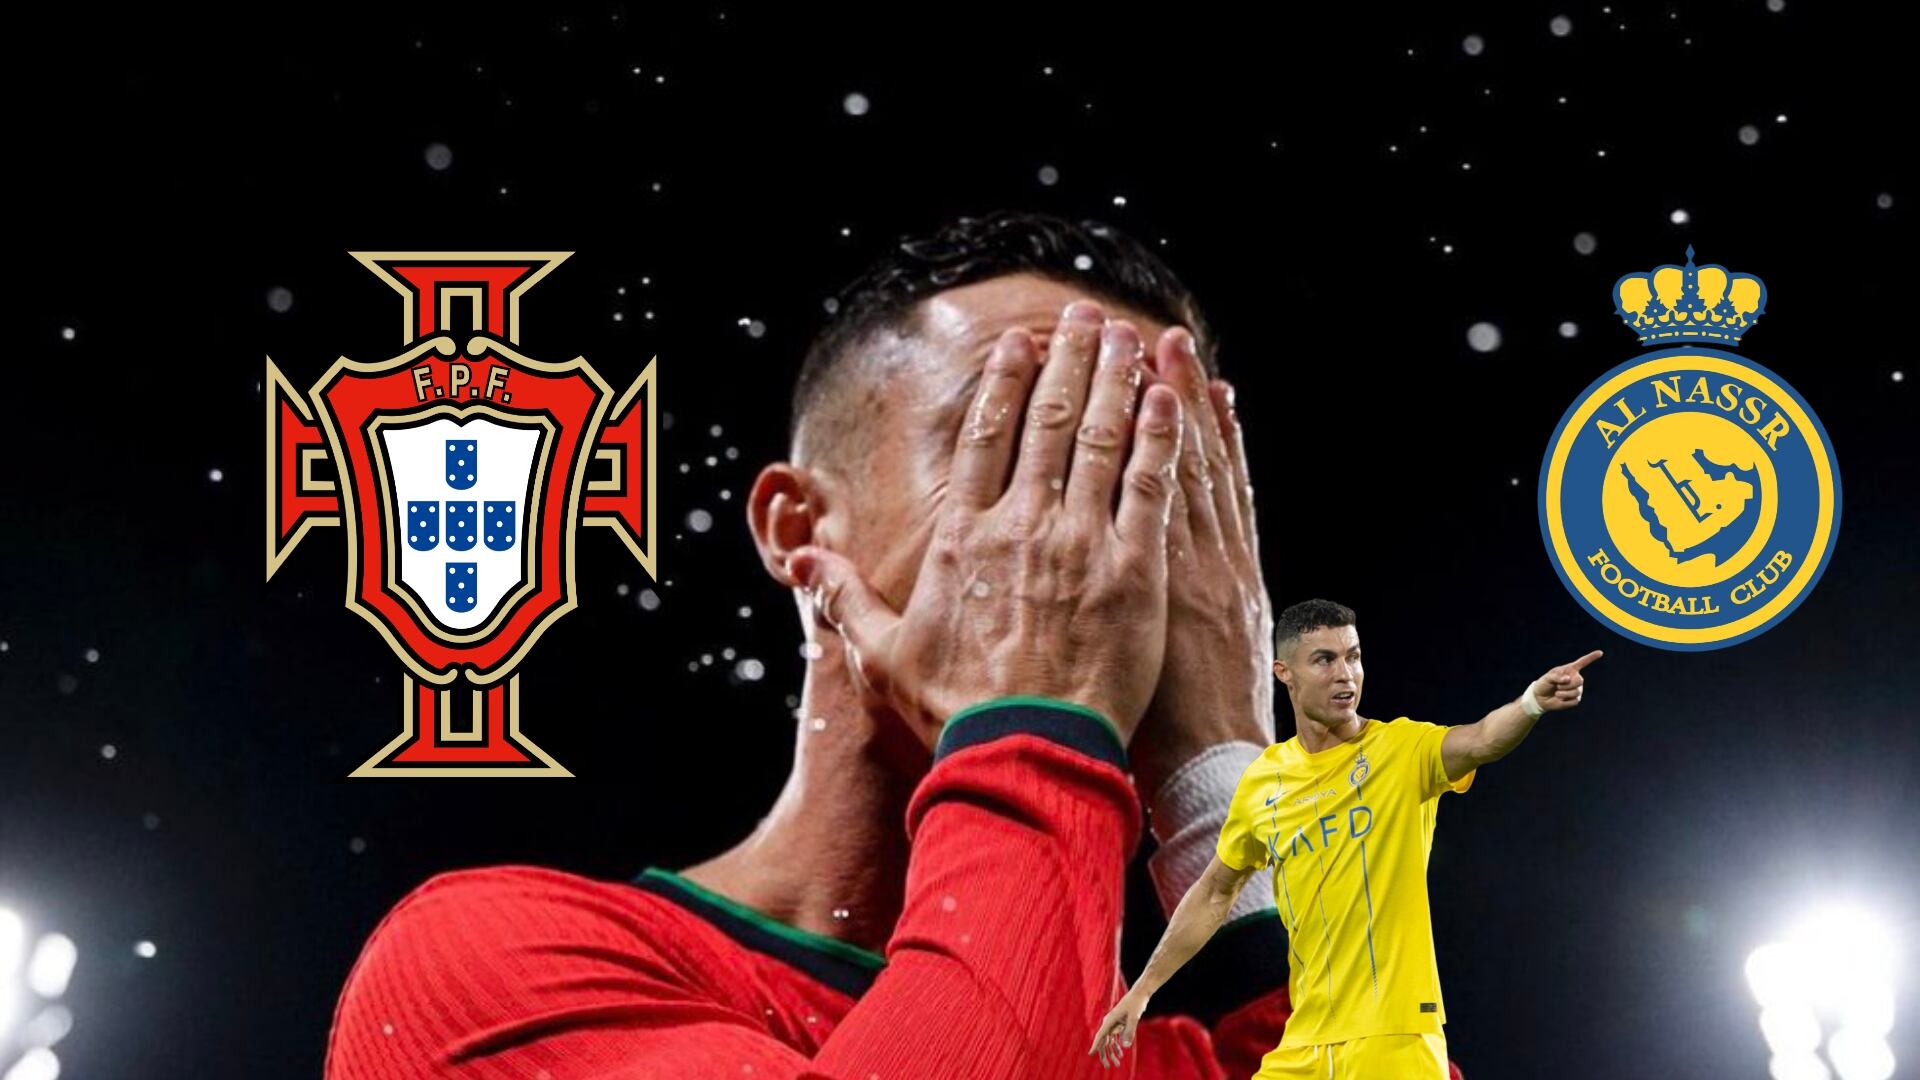 Cristiano is their star and most beloved, but the reason why Al Nassr will not be cheering for Portugal in the Euros